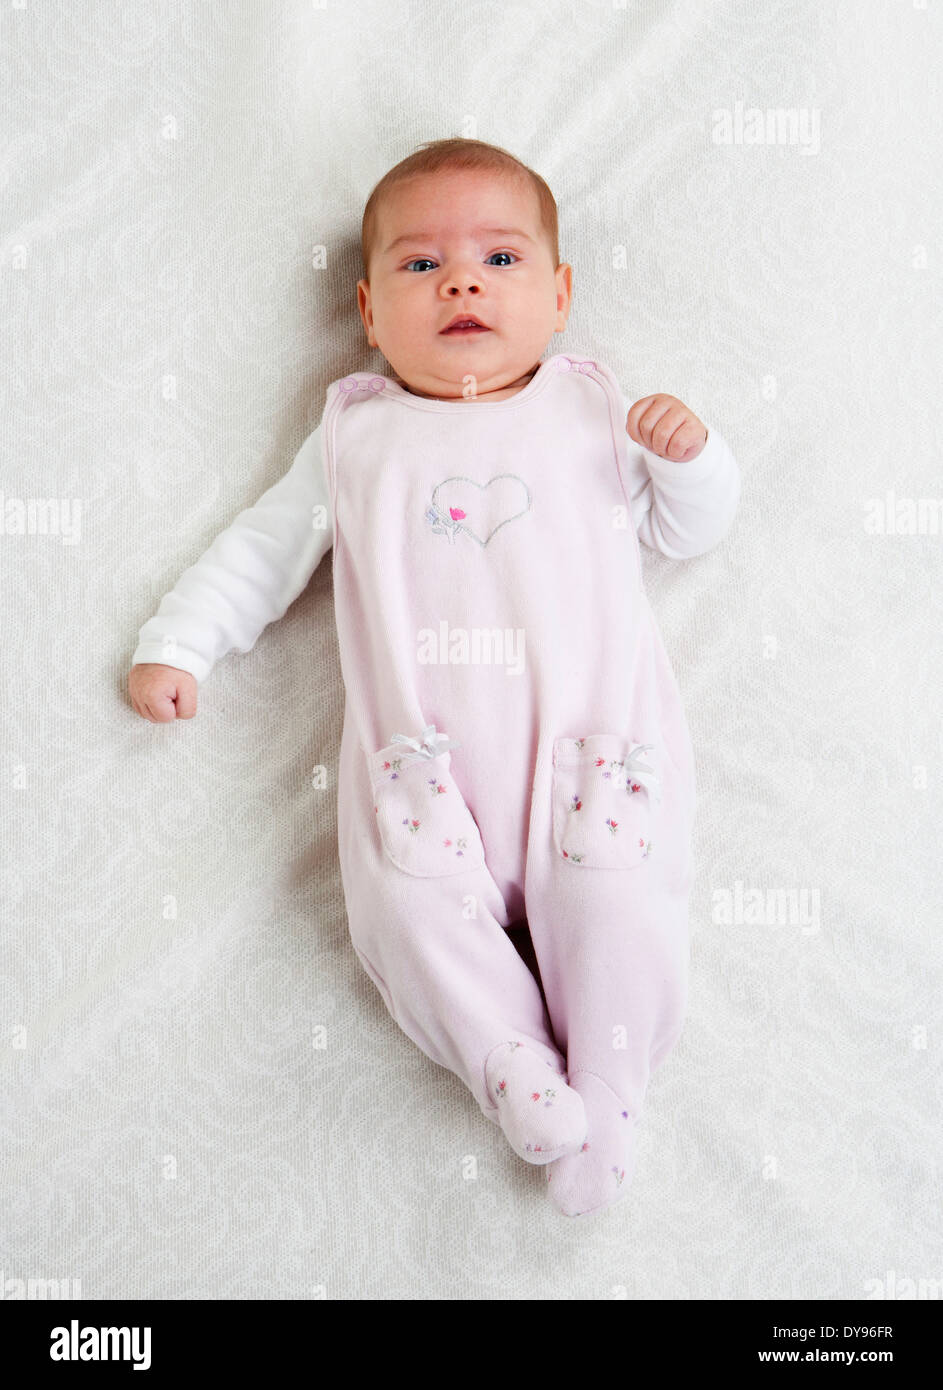 Female baby wearing pink rompers lying on white cloth Stock Photo